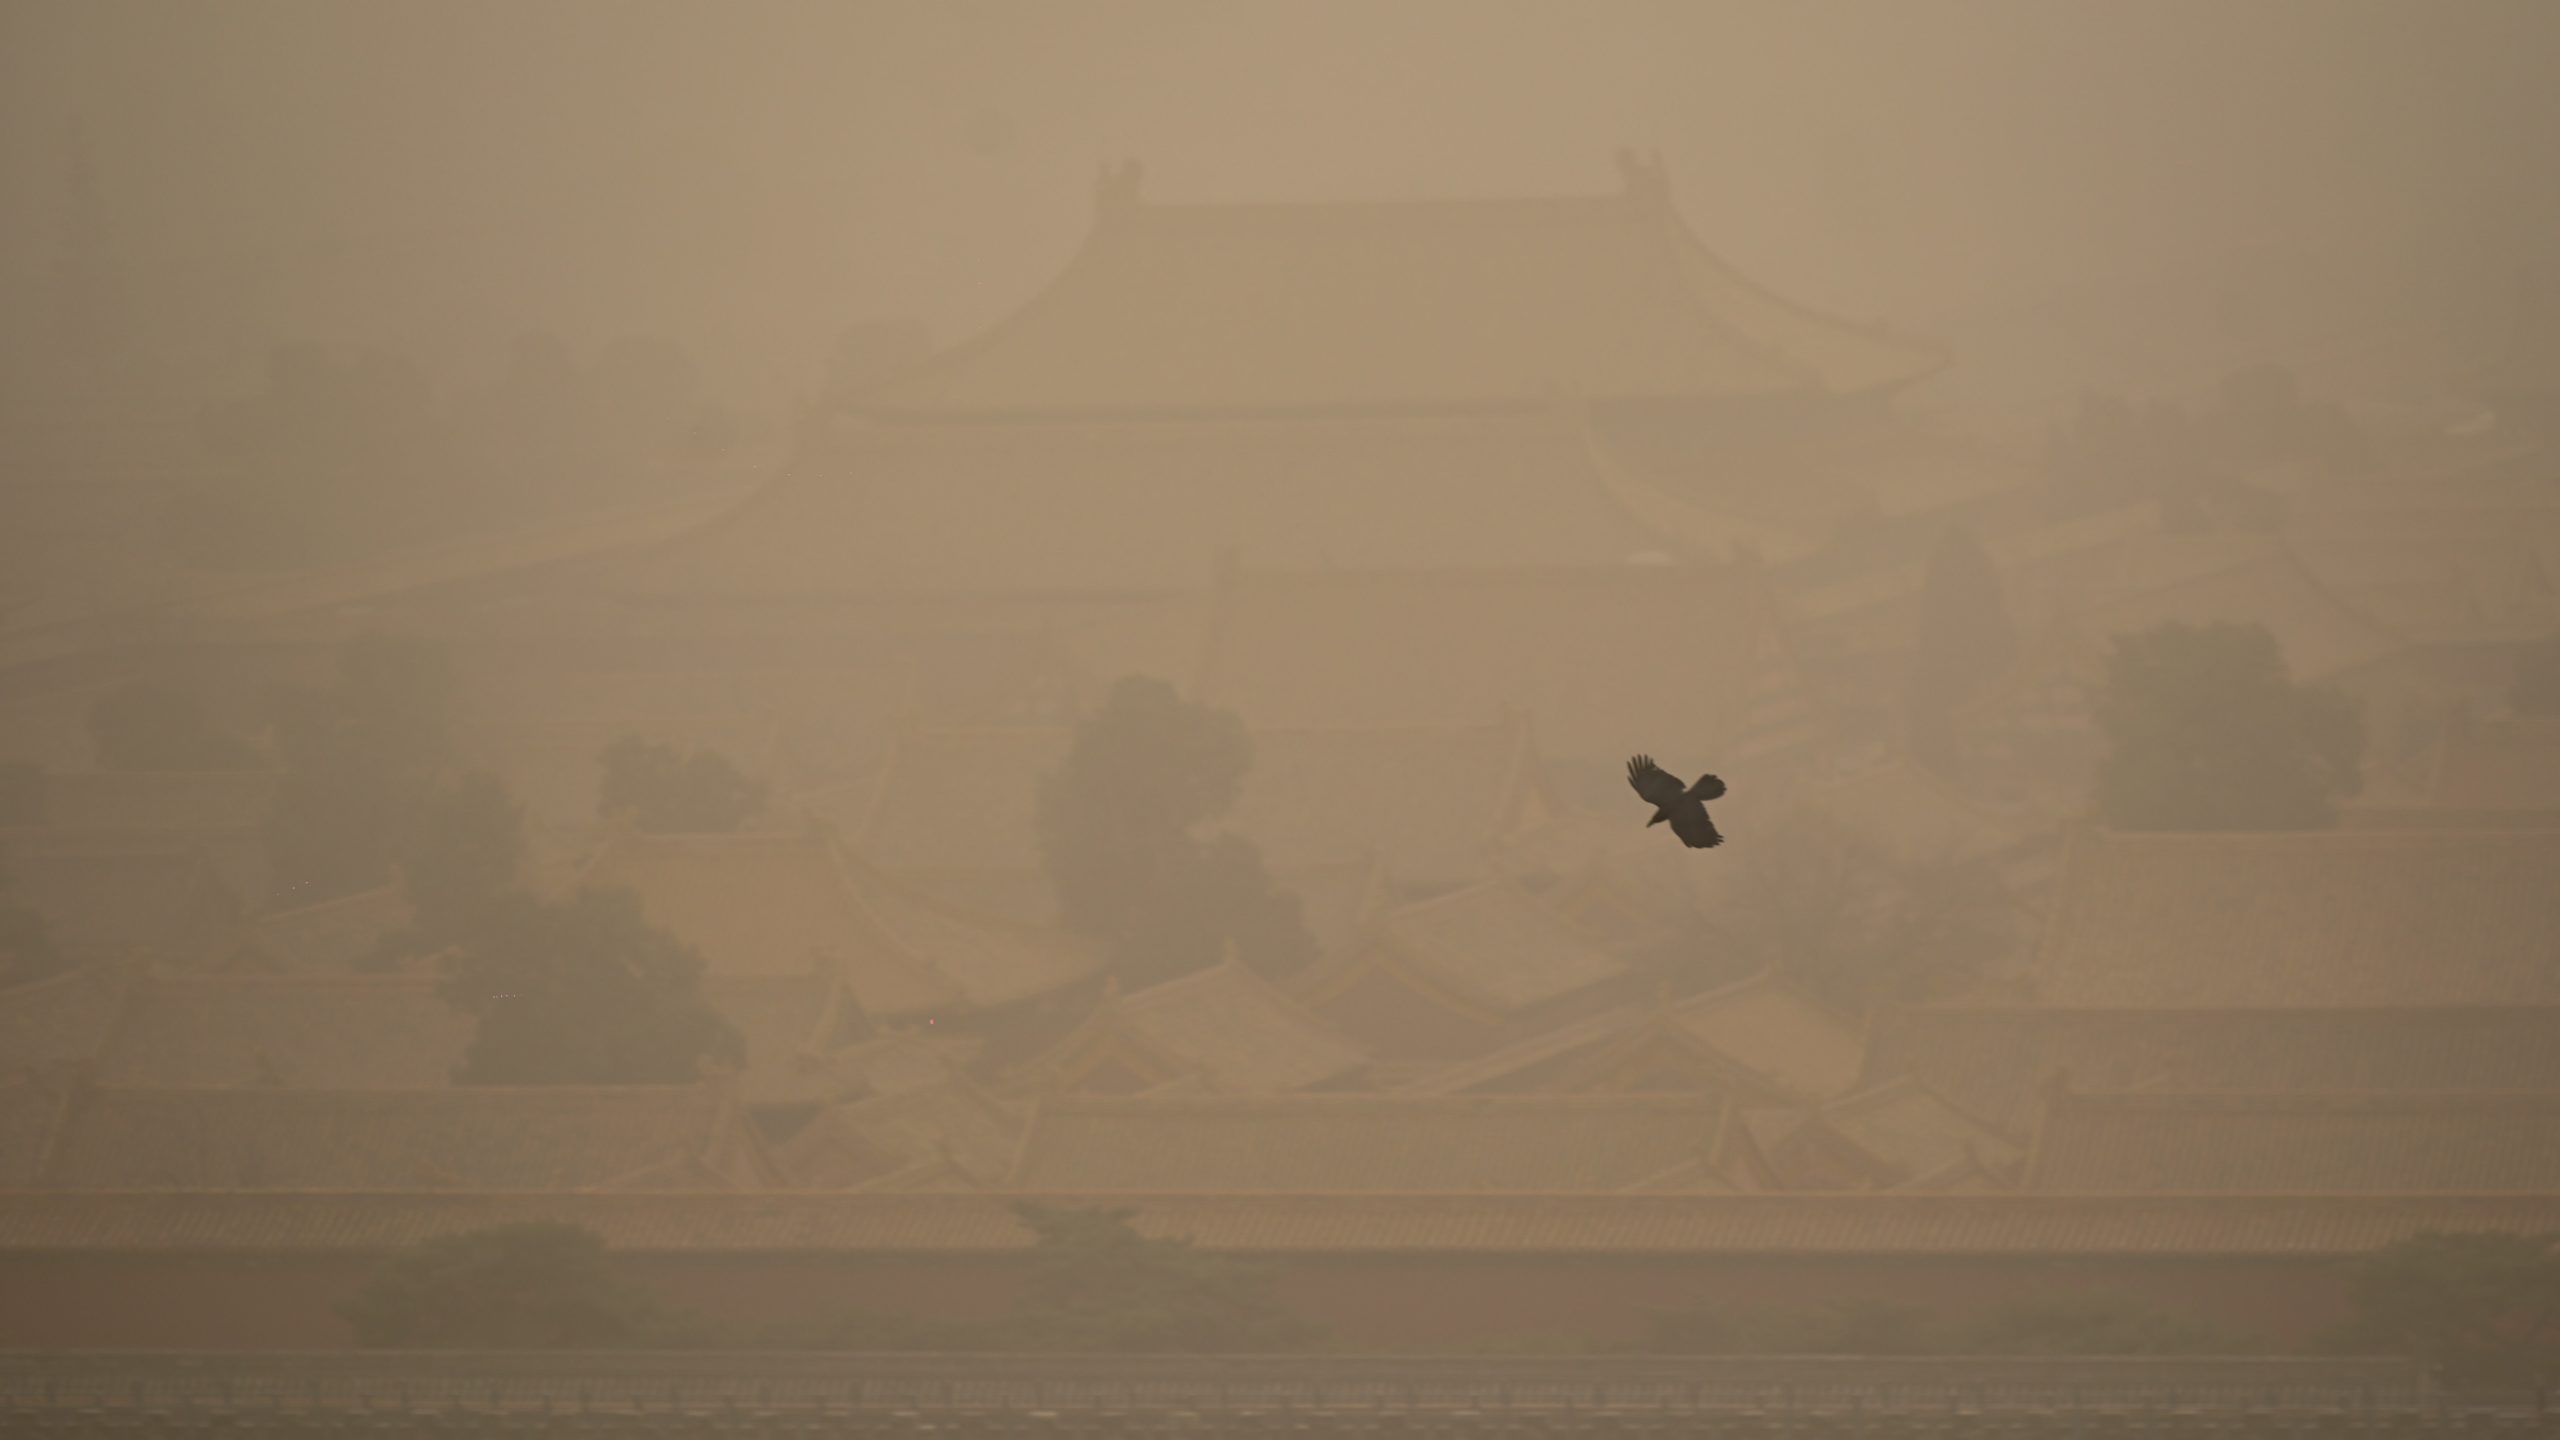 A crow flies over the Forbidden City during a sandstorm in Beijing on March 15, 2021.  (Photo: Wang Zhao, Getty Images)